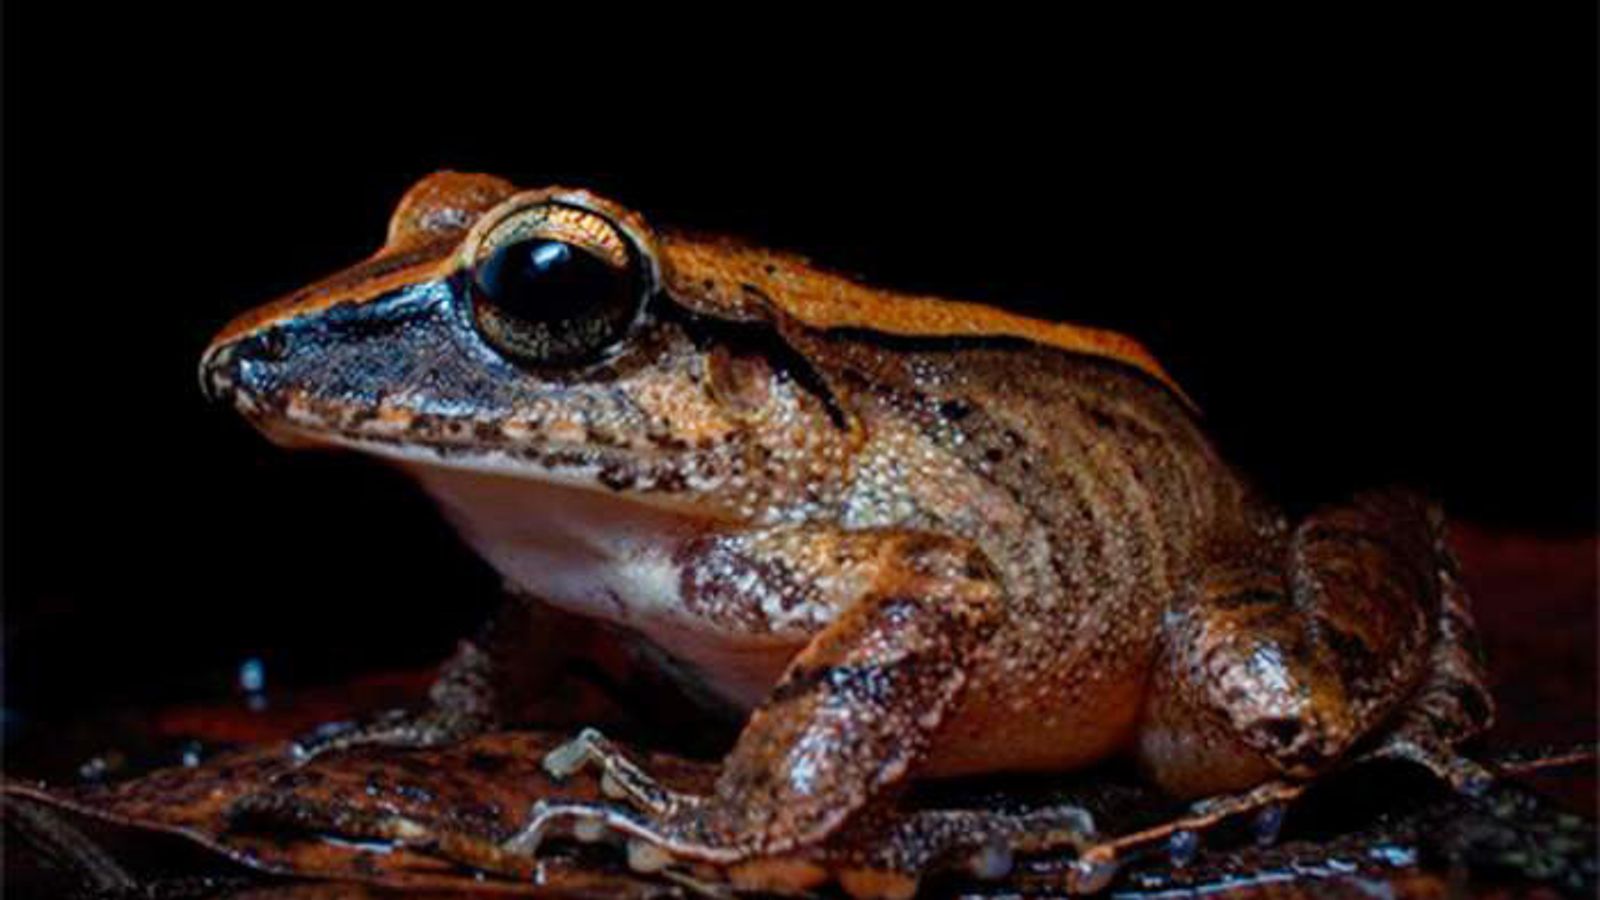 Scientists in Brazil have discovered that frogs are screaming and we are unable to hear them.